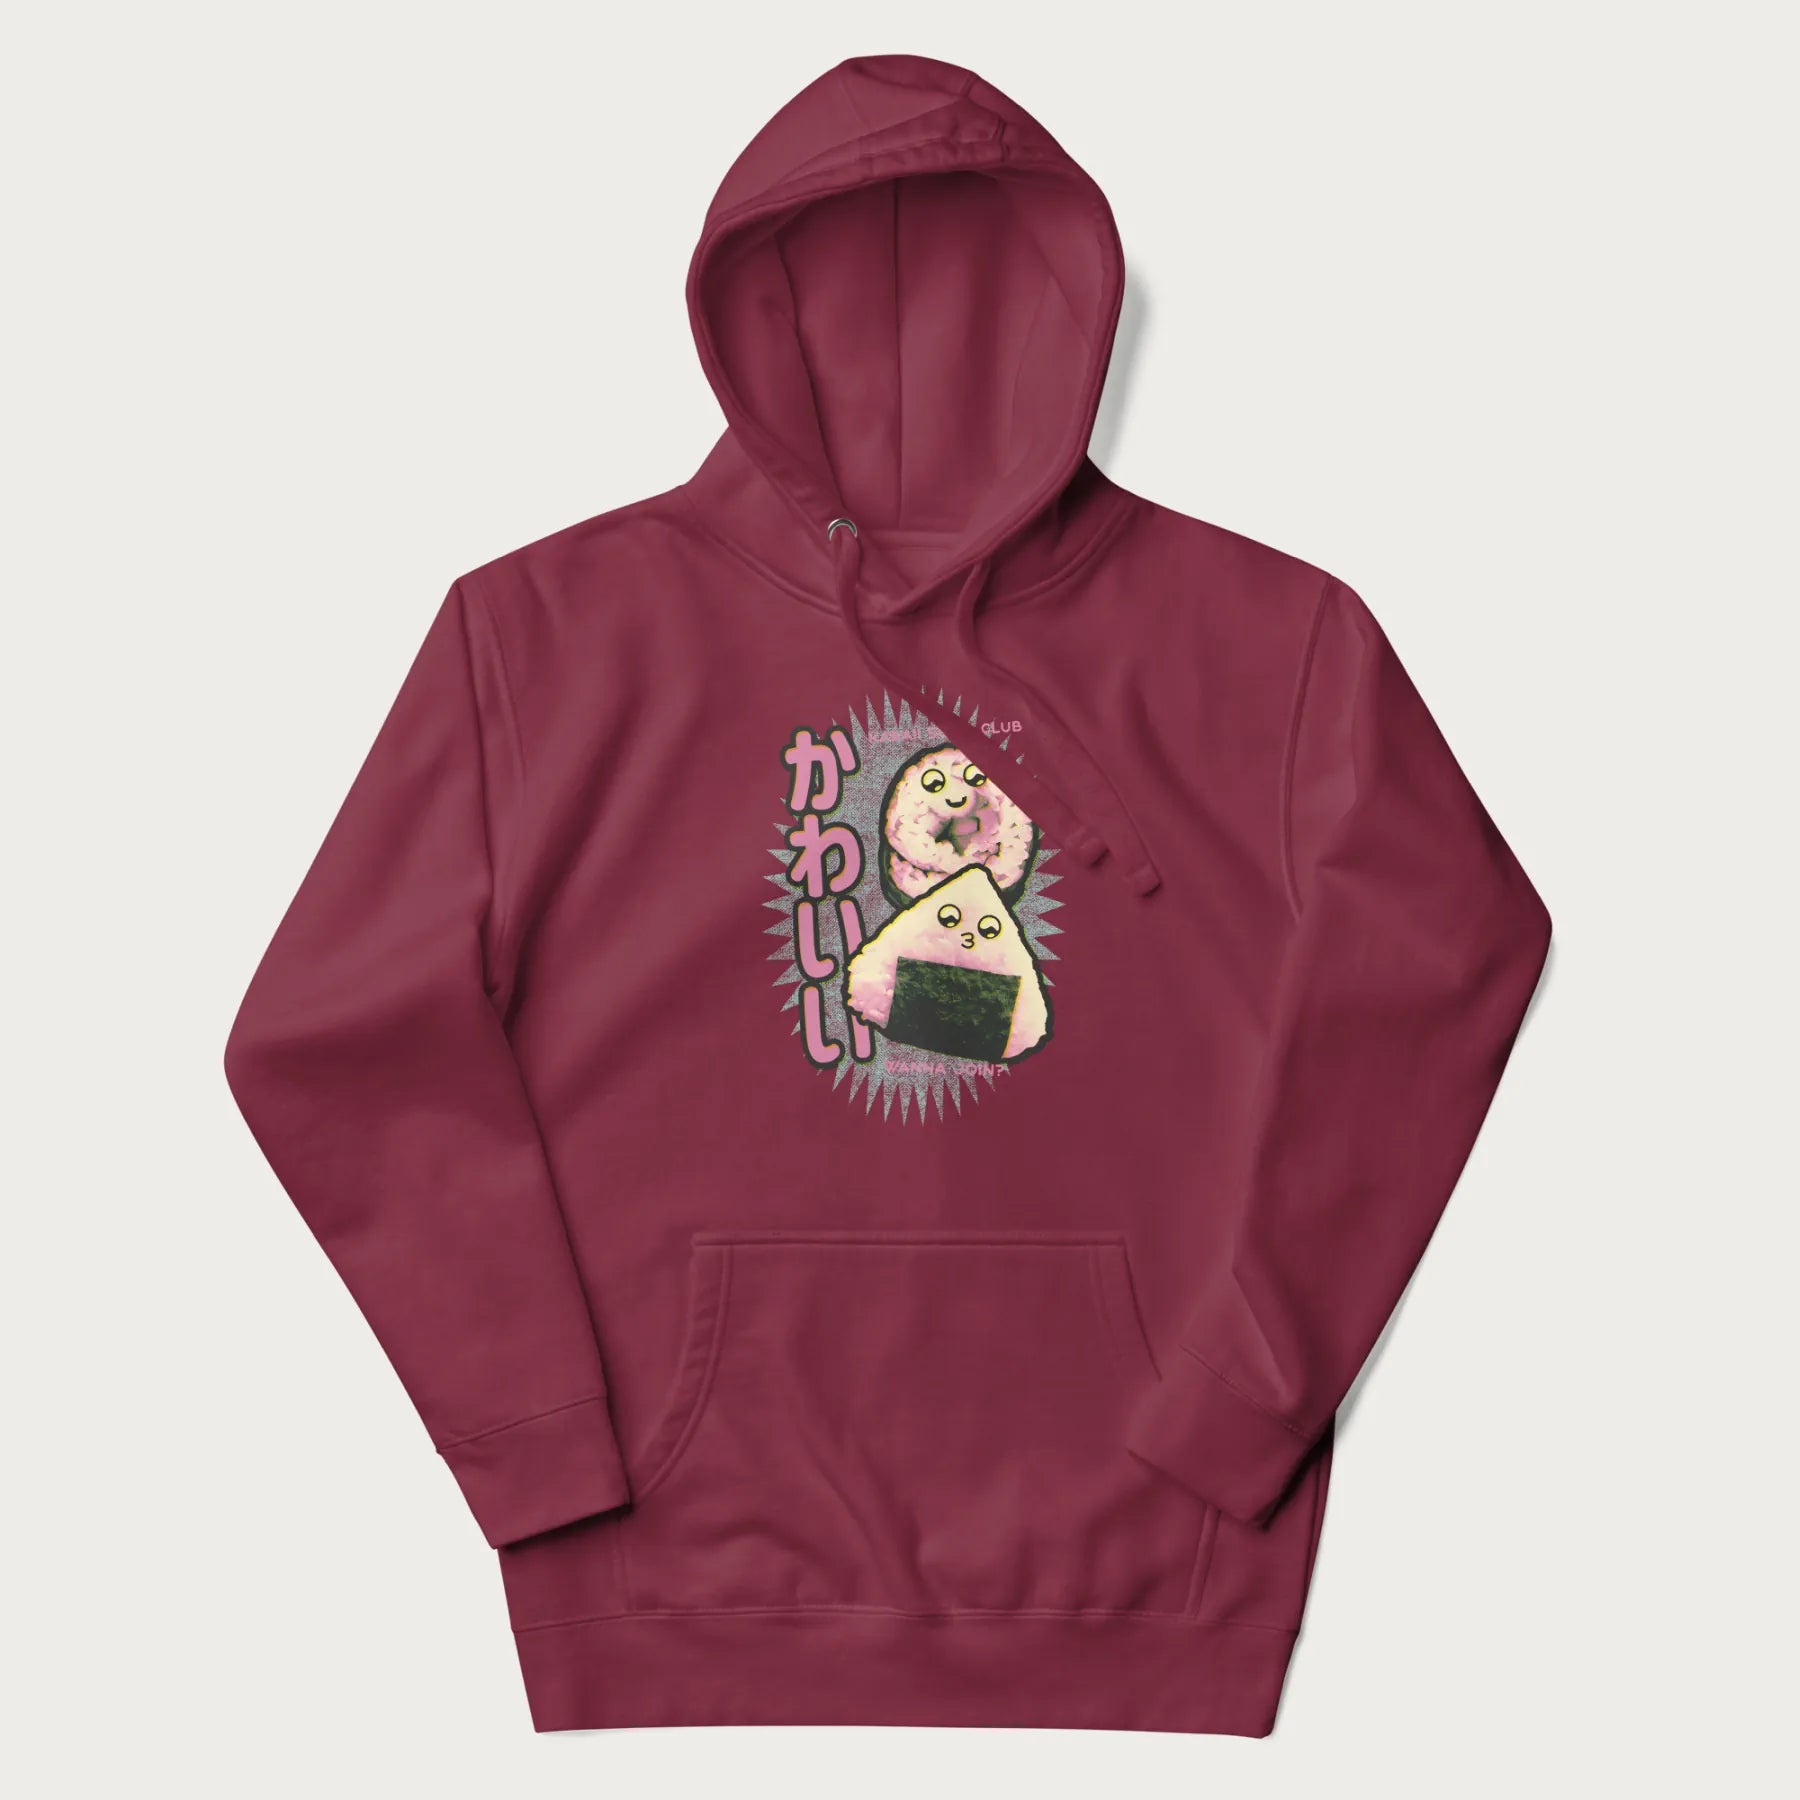 Maroon hoodie featuring a cute sushi and onigiri graphic with the text "Kawaii Sushi Club", colorful neon accents and Japanese characters.